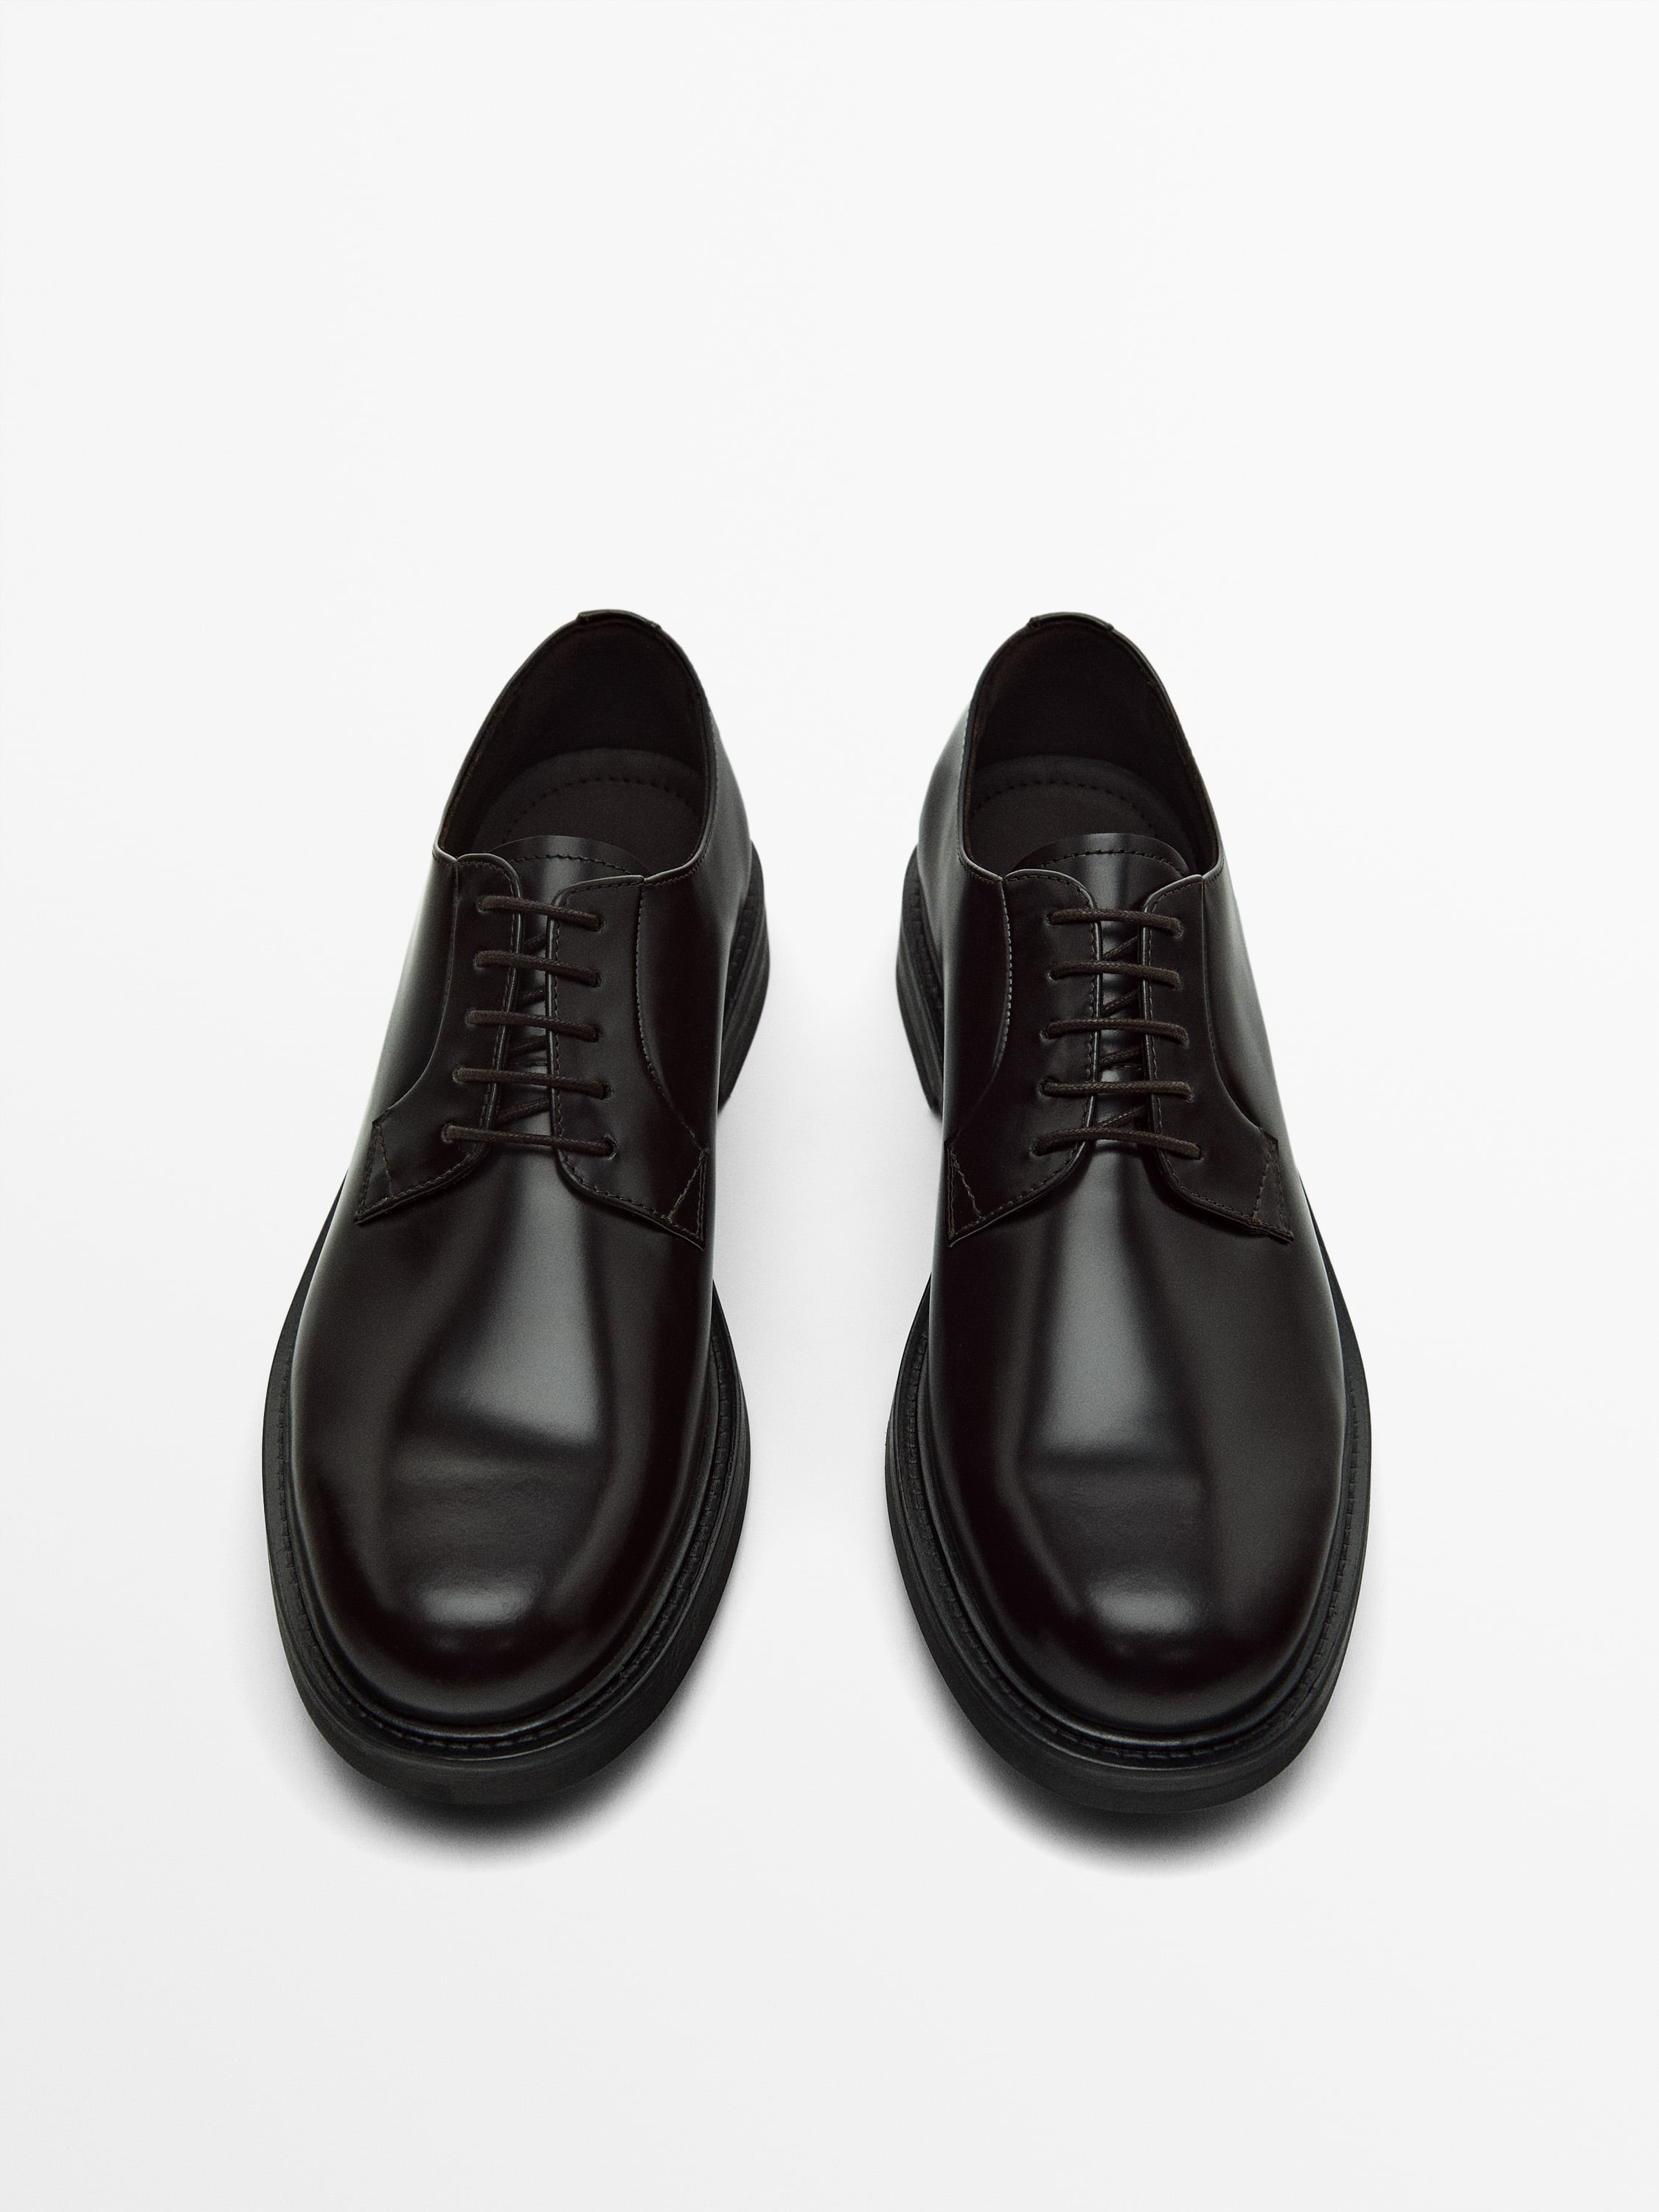 Brown derby shoes